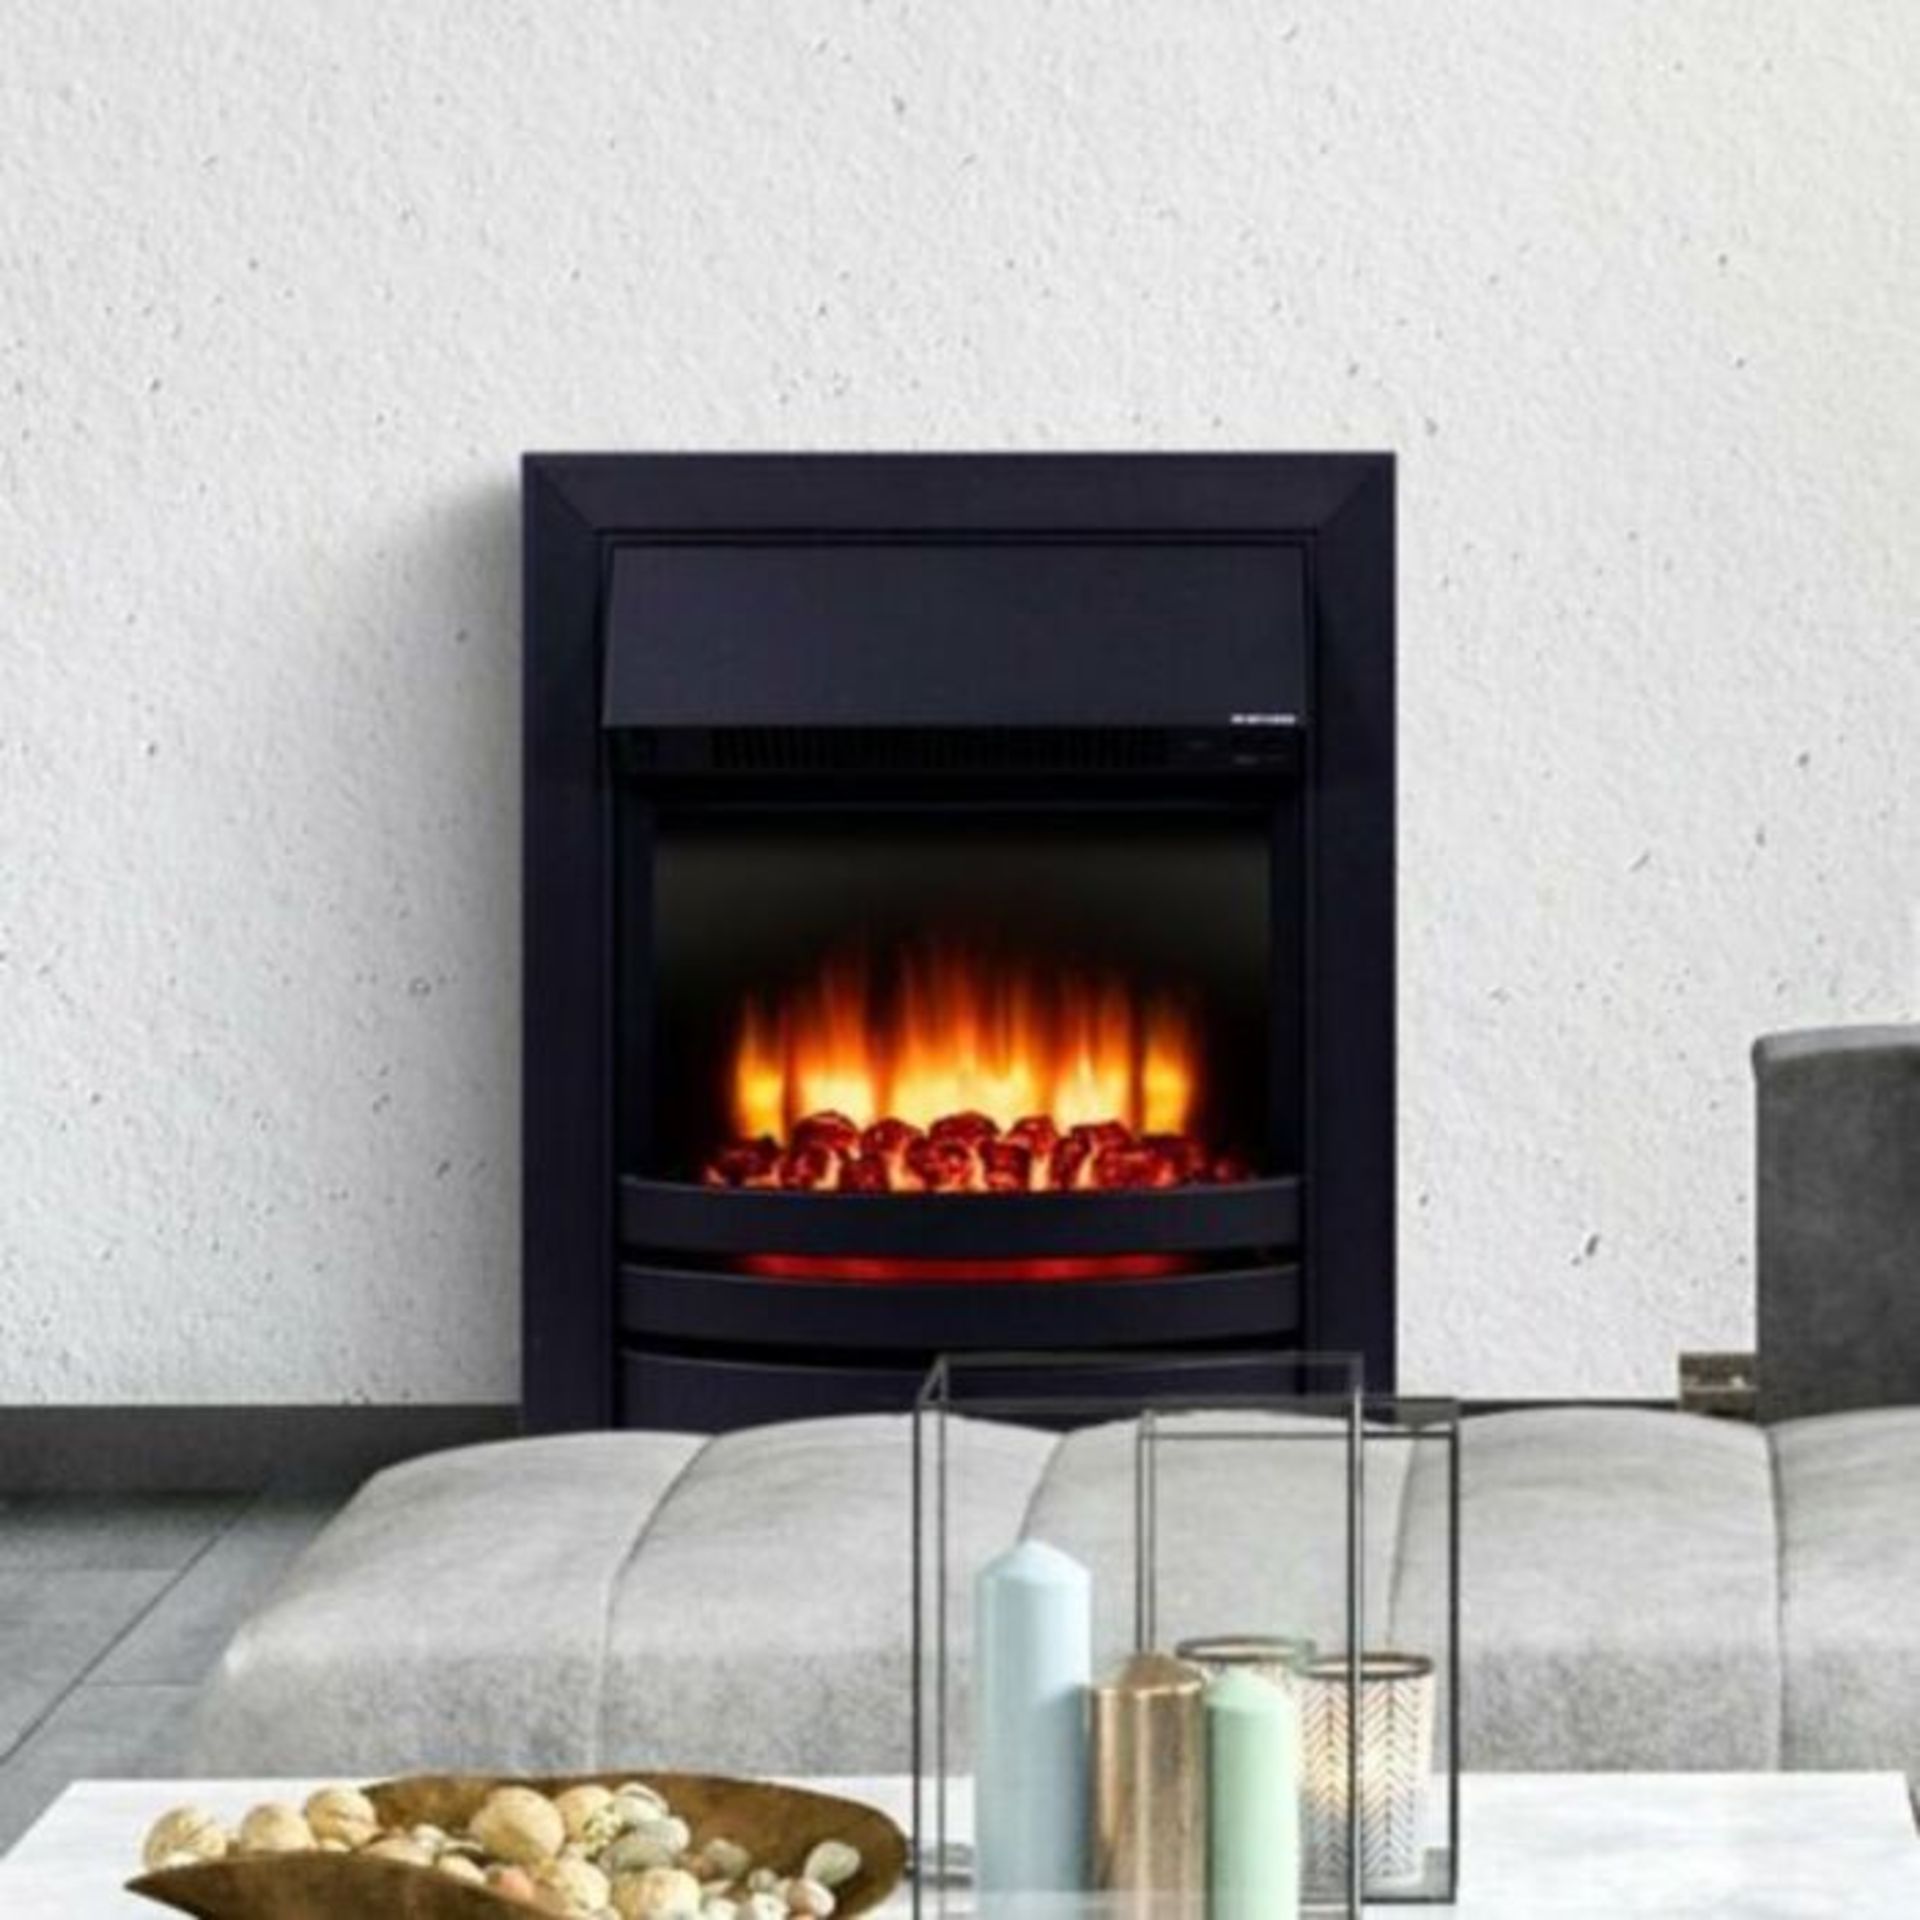 Belfry Heating,Meadow Electric Fire (U003073262)(BOXED RETURN NOT CHECKED) RRP -£189 (25490/1 -